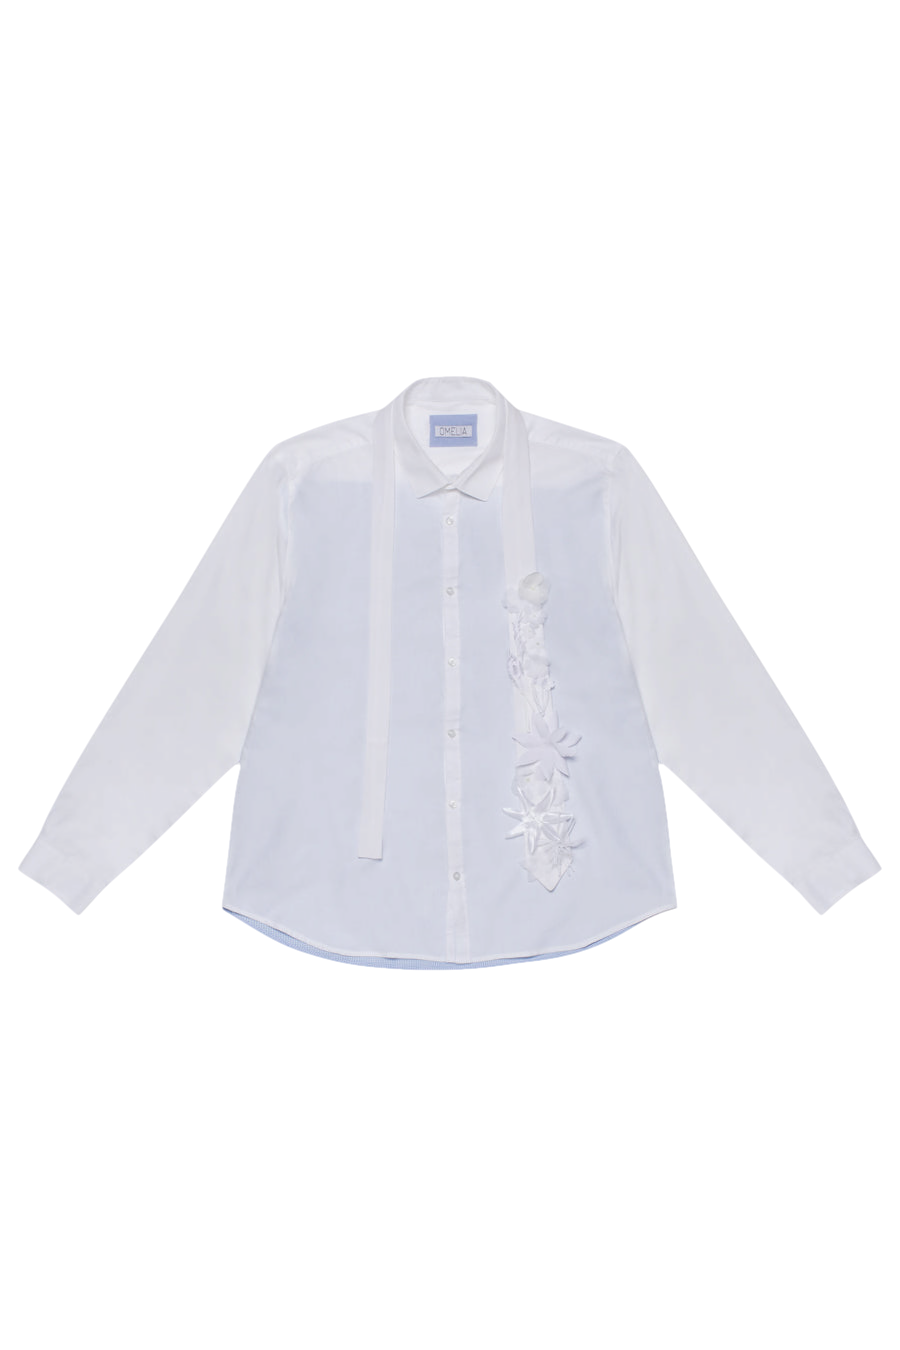 Omelia Redesigned Shirt 88 W In White